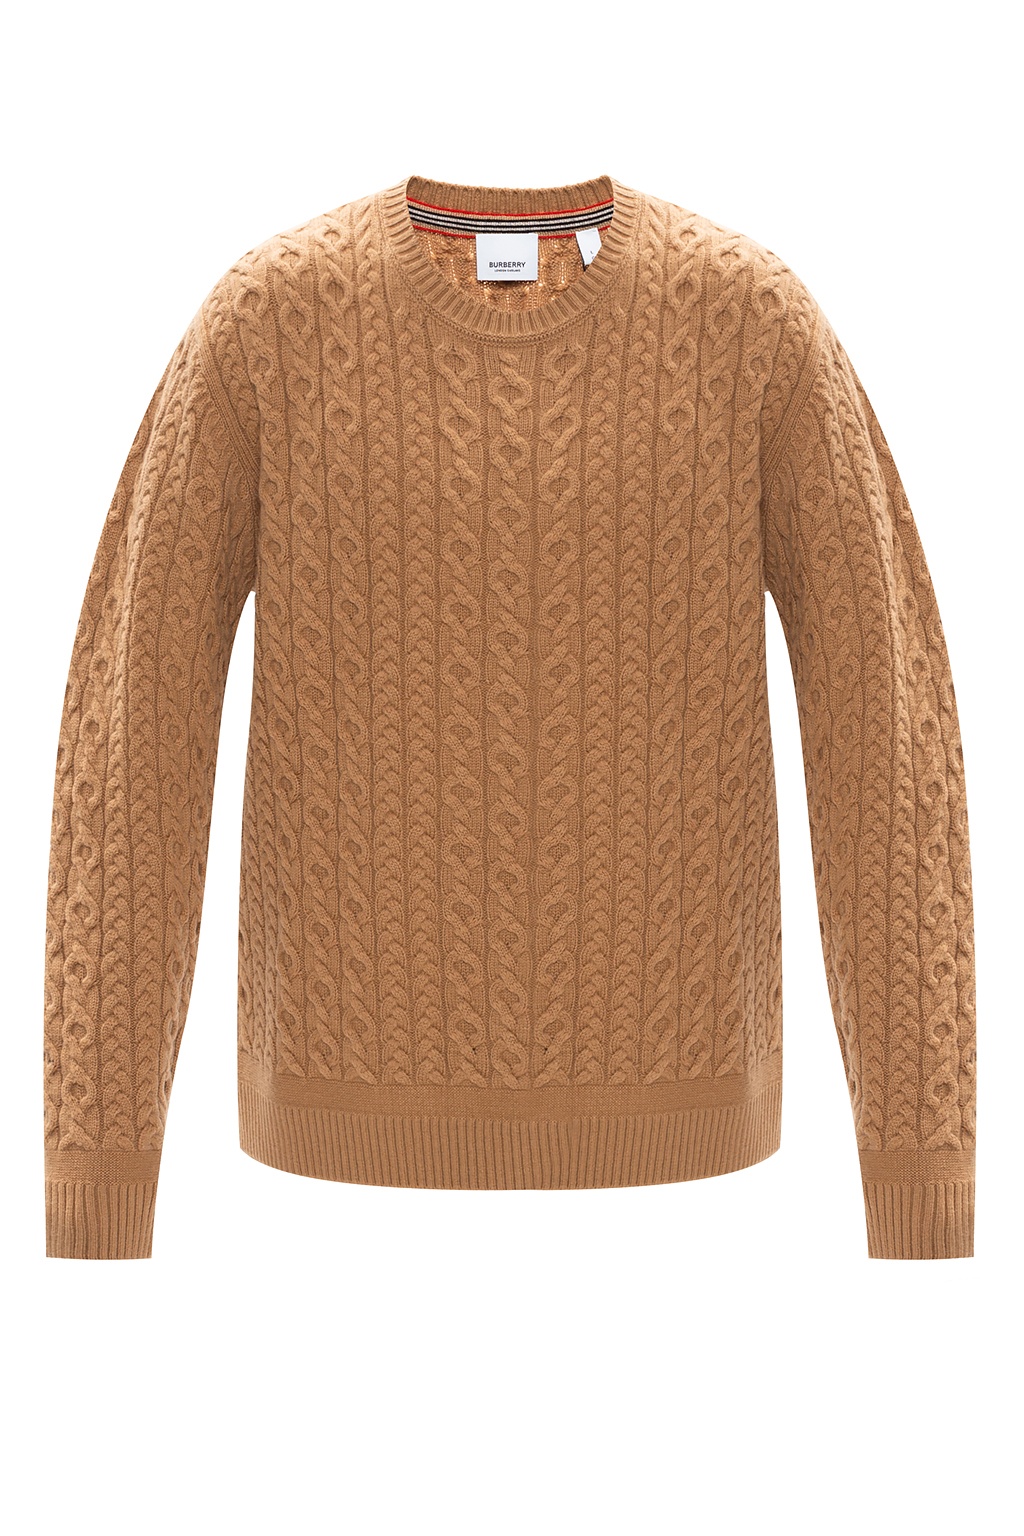 Burberry Knitted sweater